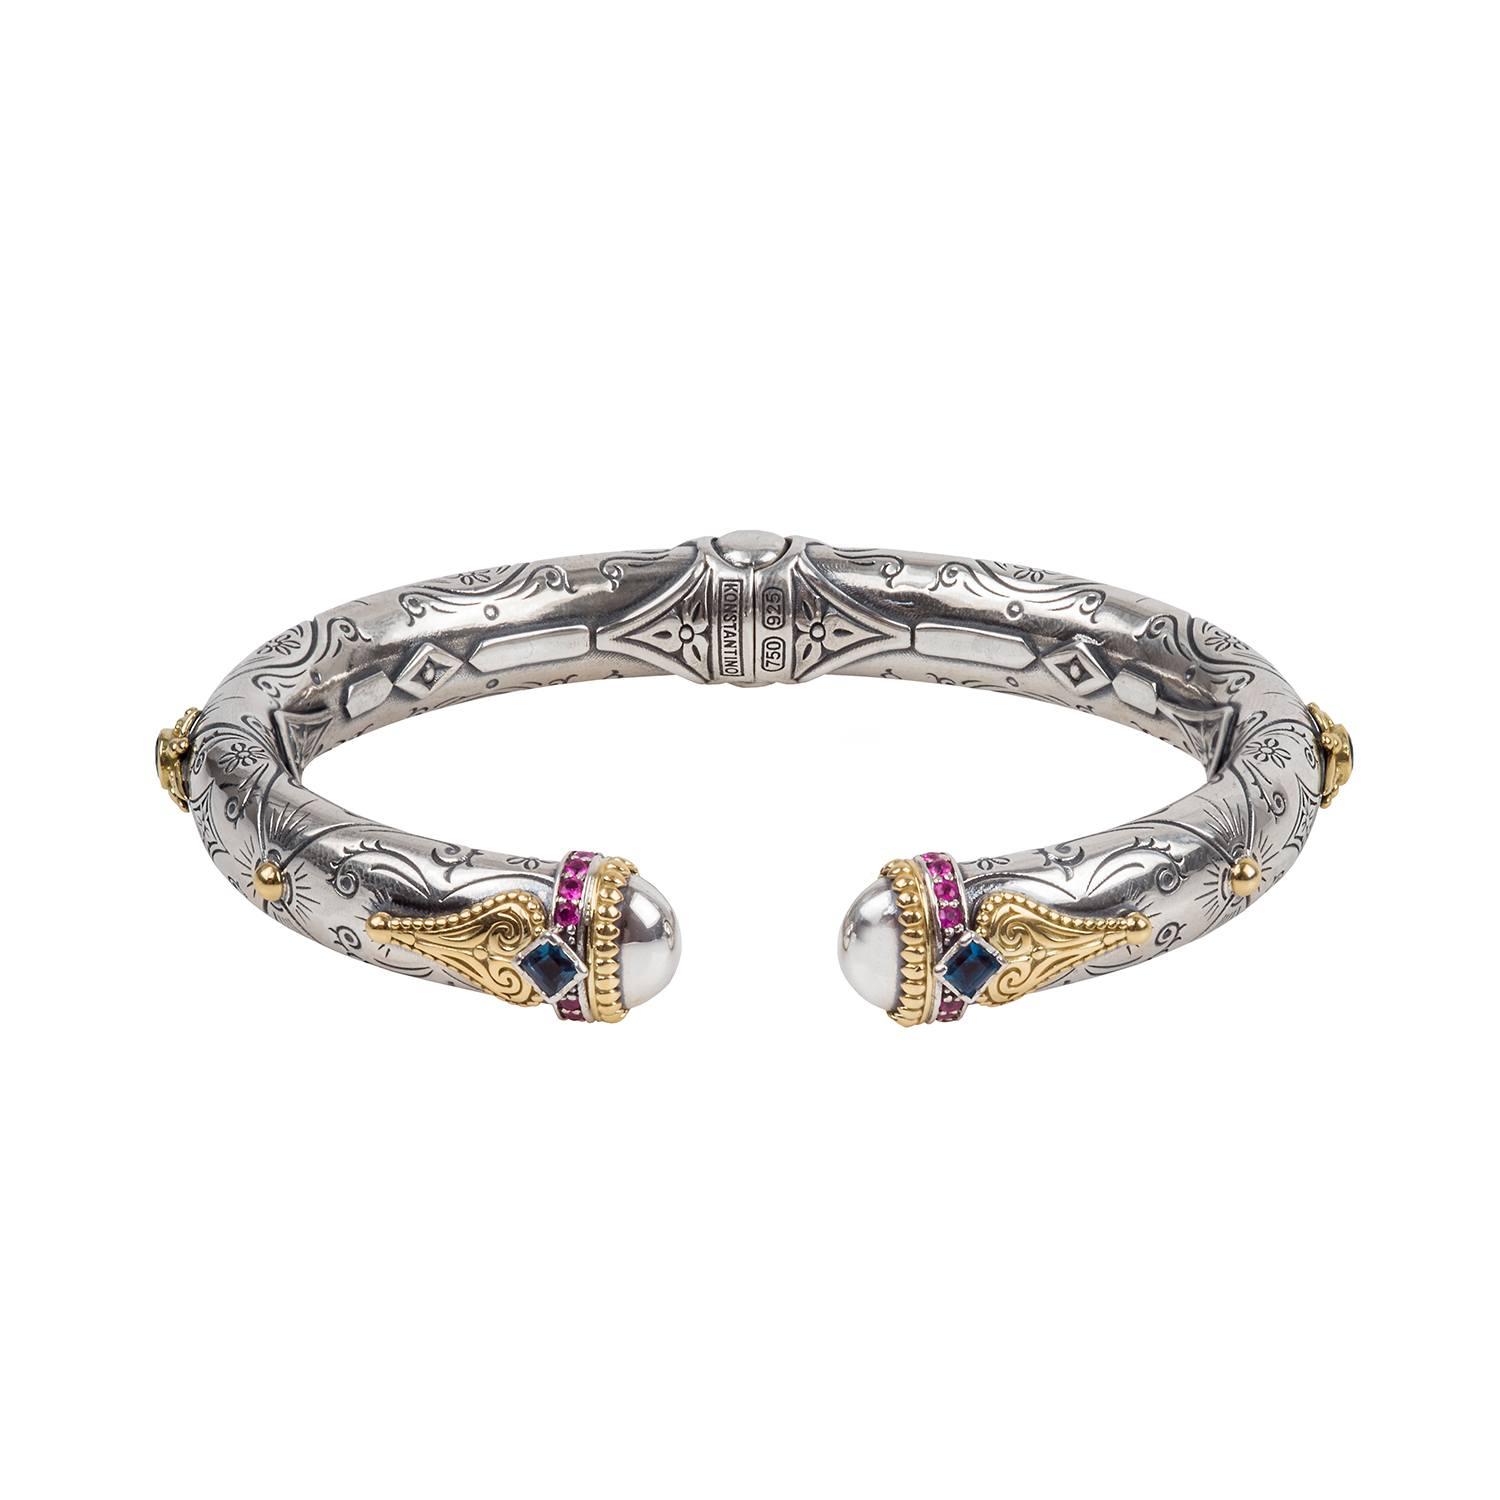 Konstantino Delos carved large open hinge bracelet with LBT and pink sapphire_1